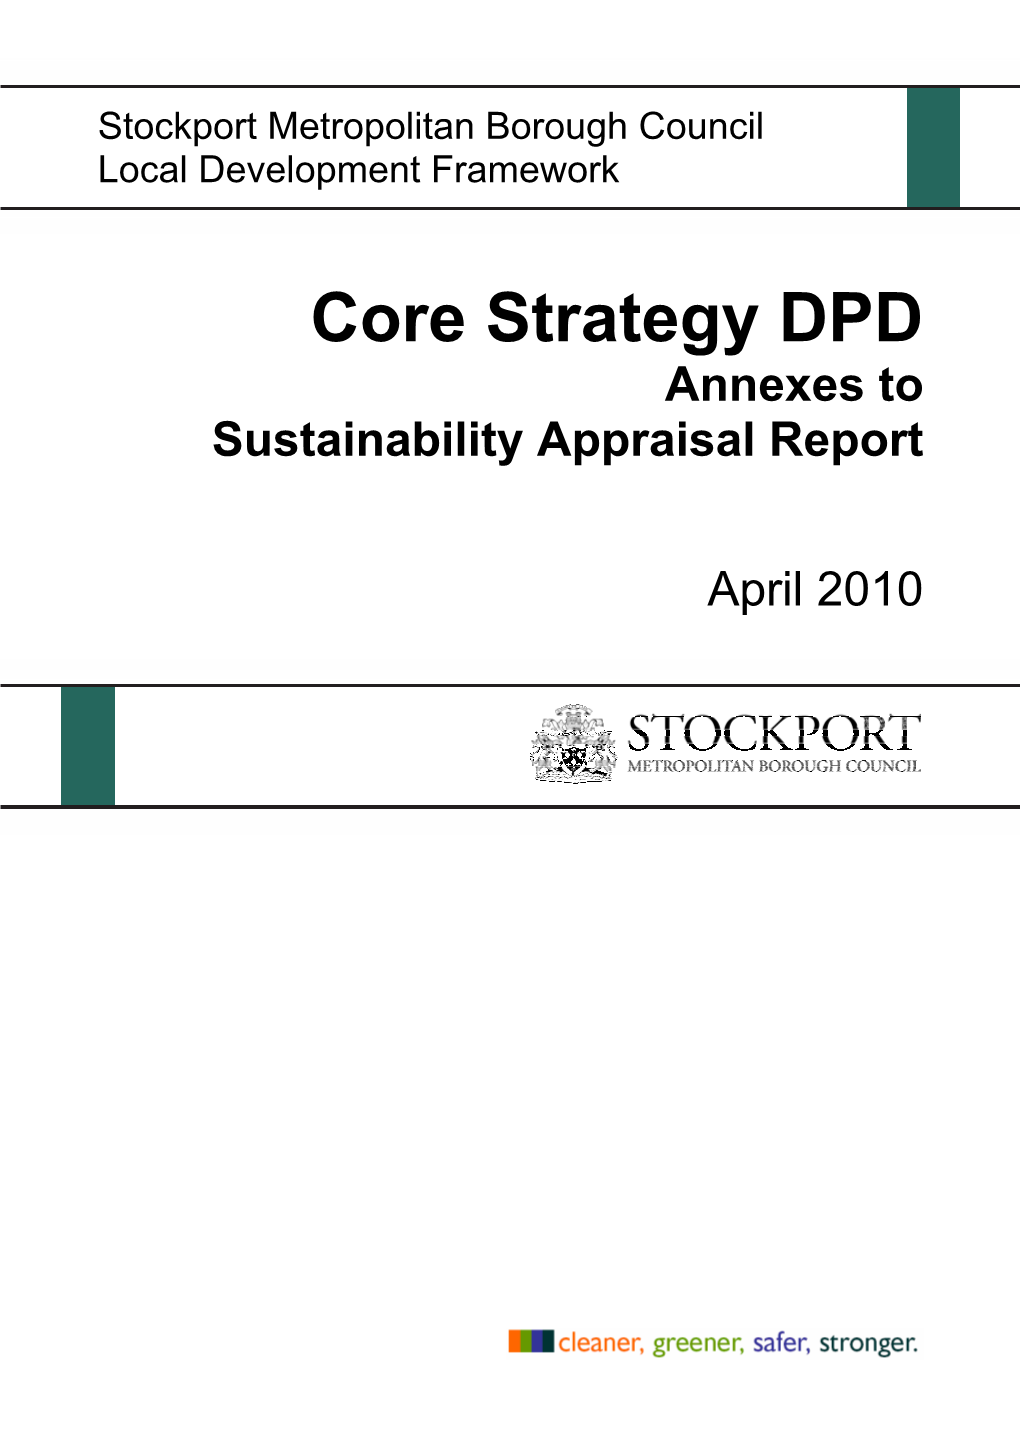 Core Strategy DPD Annexes to Sustainability Appraisal Report